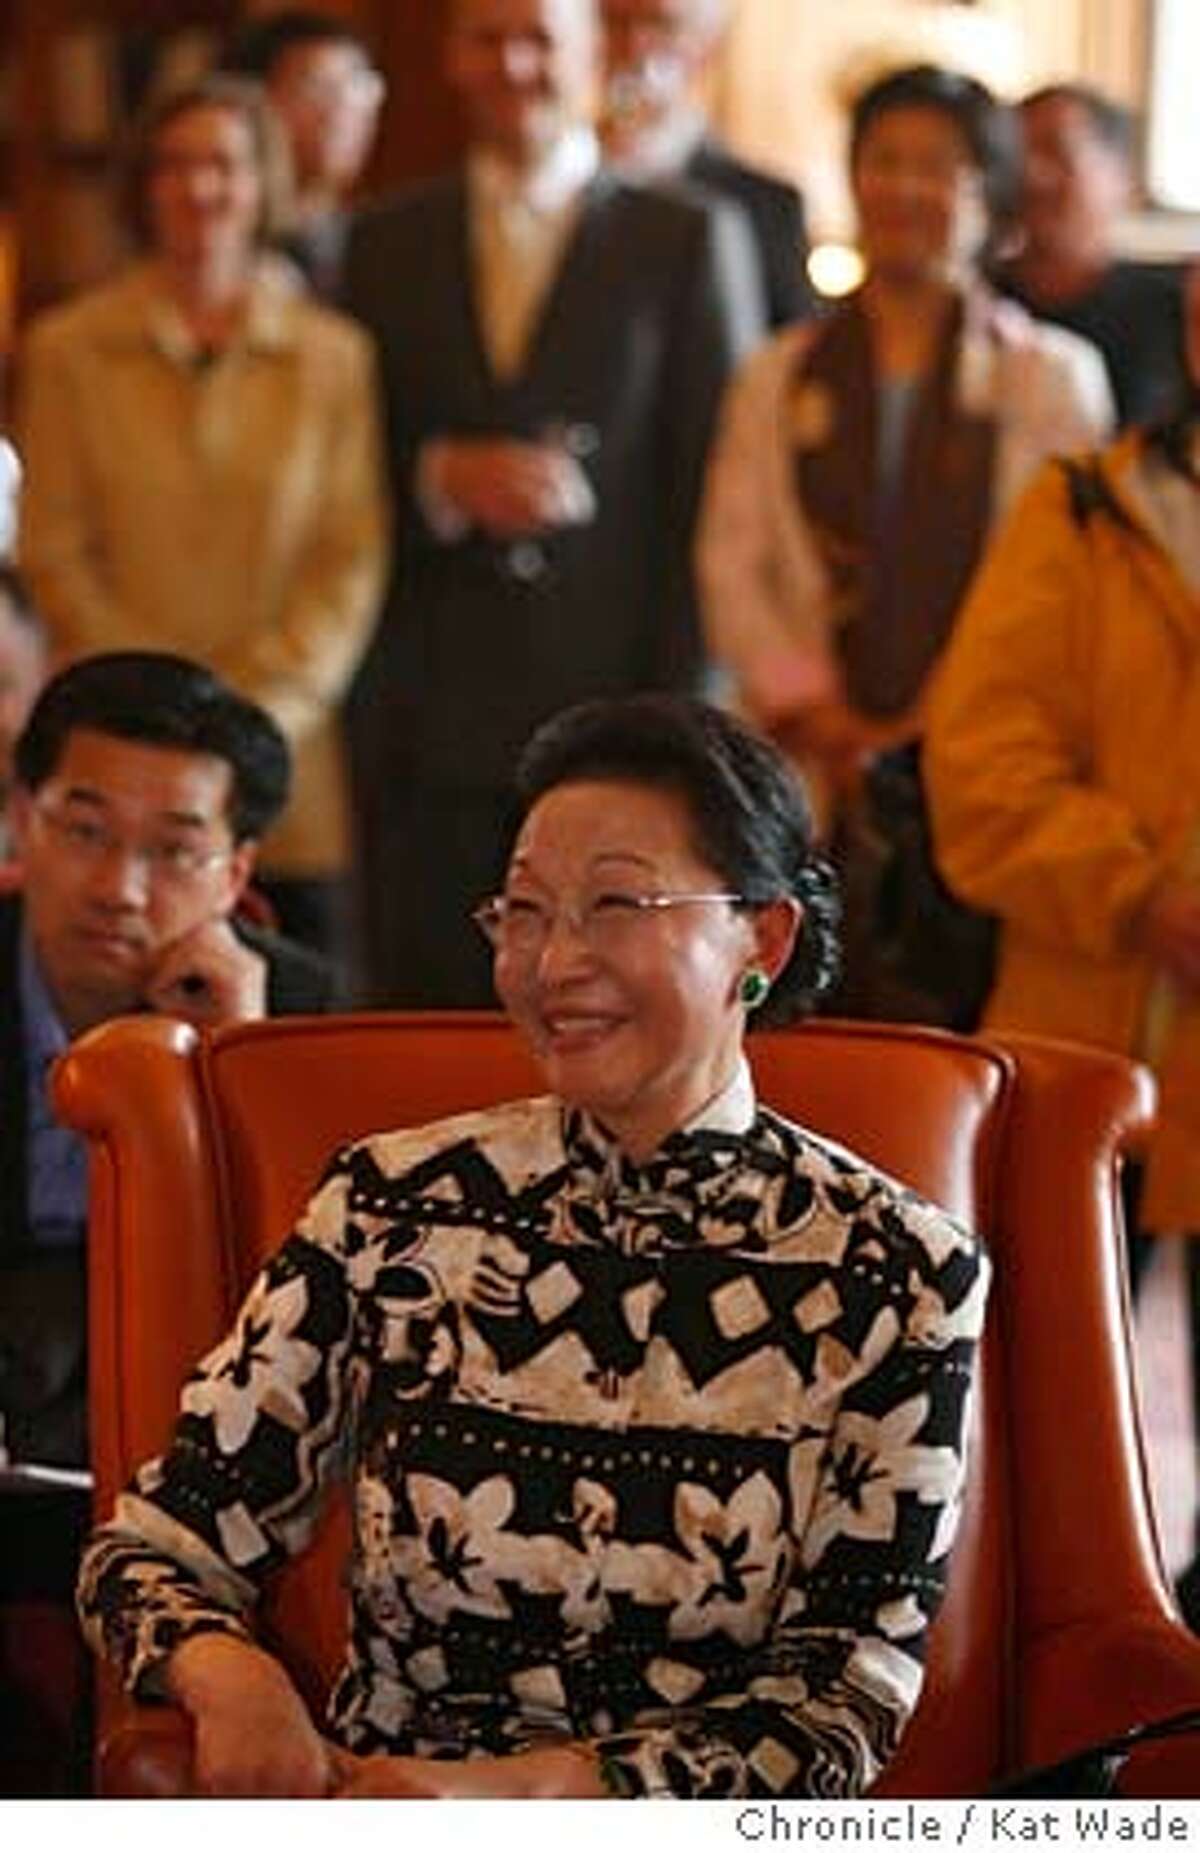 BANCROFT05_0193_KW_.jpg Florence Fang listens to the presentation today when the photographic archives of the San Francisco Examiner are donated to the University of California, Berkeley's Bancroft Library today by the SF Examiner's owner, the Anschutz Corporation's subsidirary, the SF Newspaper Company. A collection of more than 5 million items that date from circa 1919 to the late 90's. Kat Wade/The Chronicle Mandatory Credit for San Francisco Chronicle and photographer, Kat Wade, Mags out